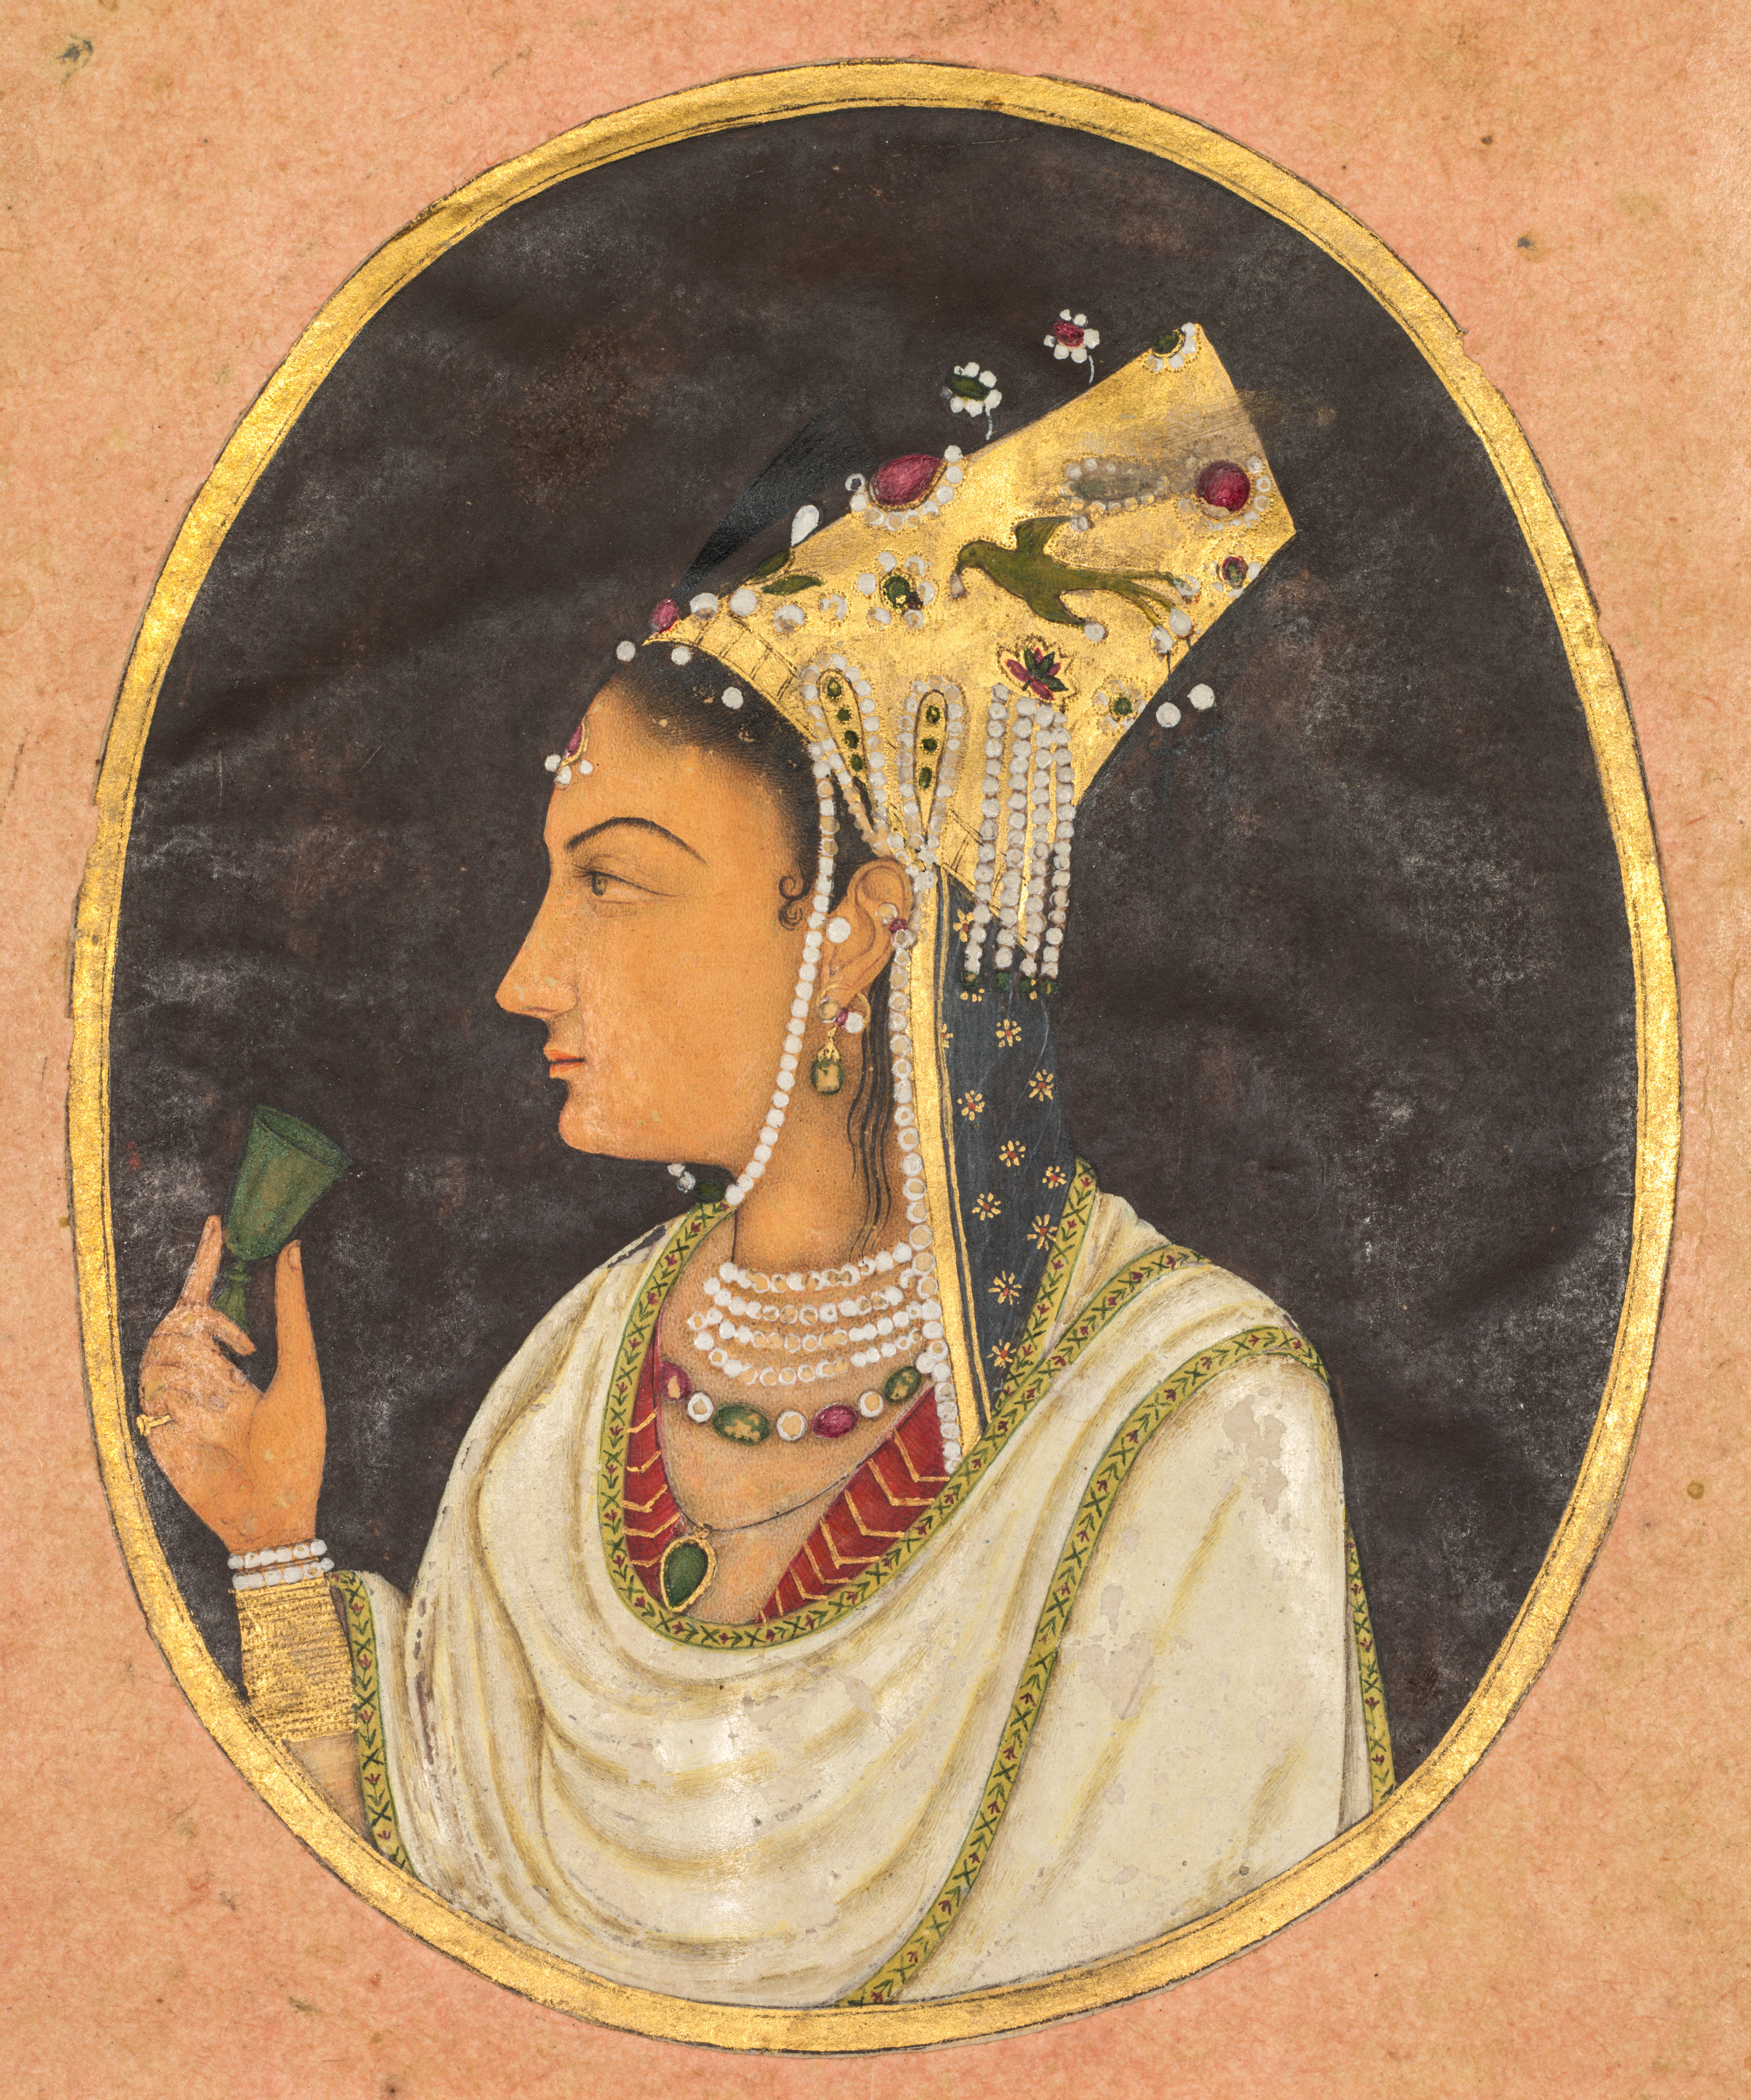 Oval portrait of a woman in a Chaghtai hat